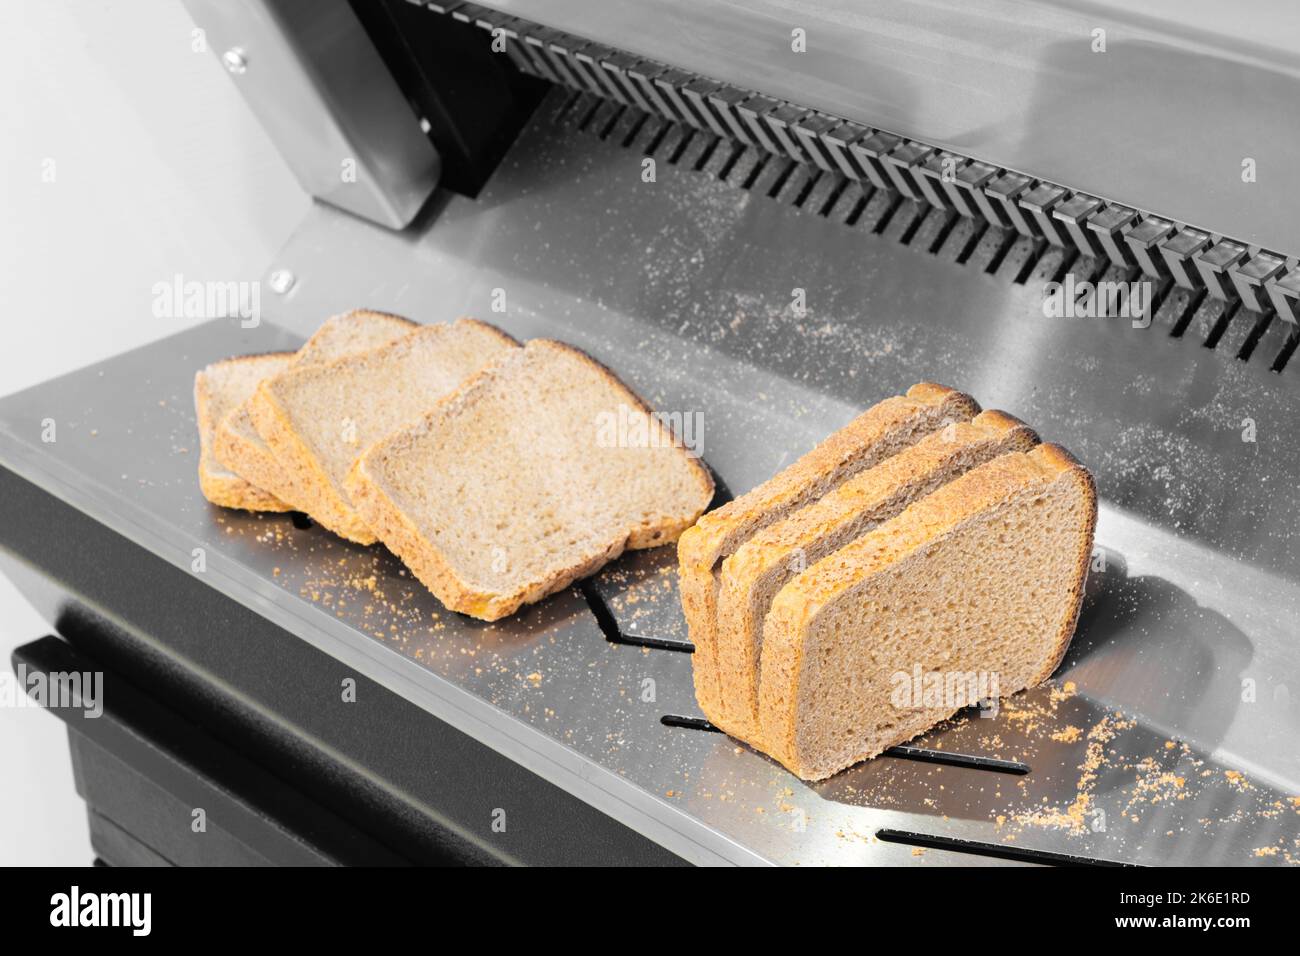 https://c8.alamy.com/comp/2K6E1RD/sliced-bread-in-cutting-machine-industrial-bread-slicer-in-supermarket-with-bread-crumbs-ready-to-use-2K6E1RD.jpg